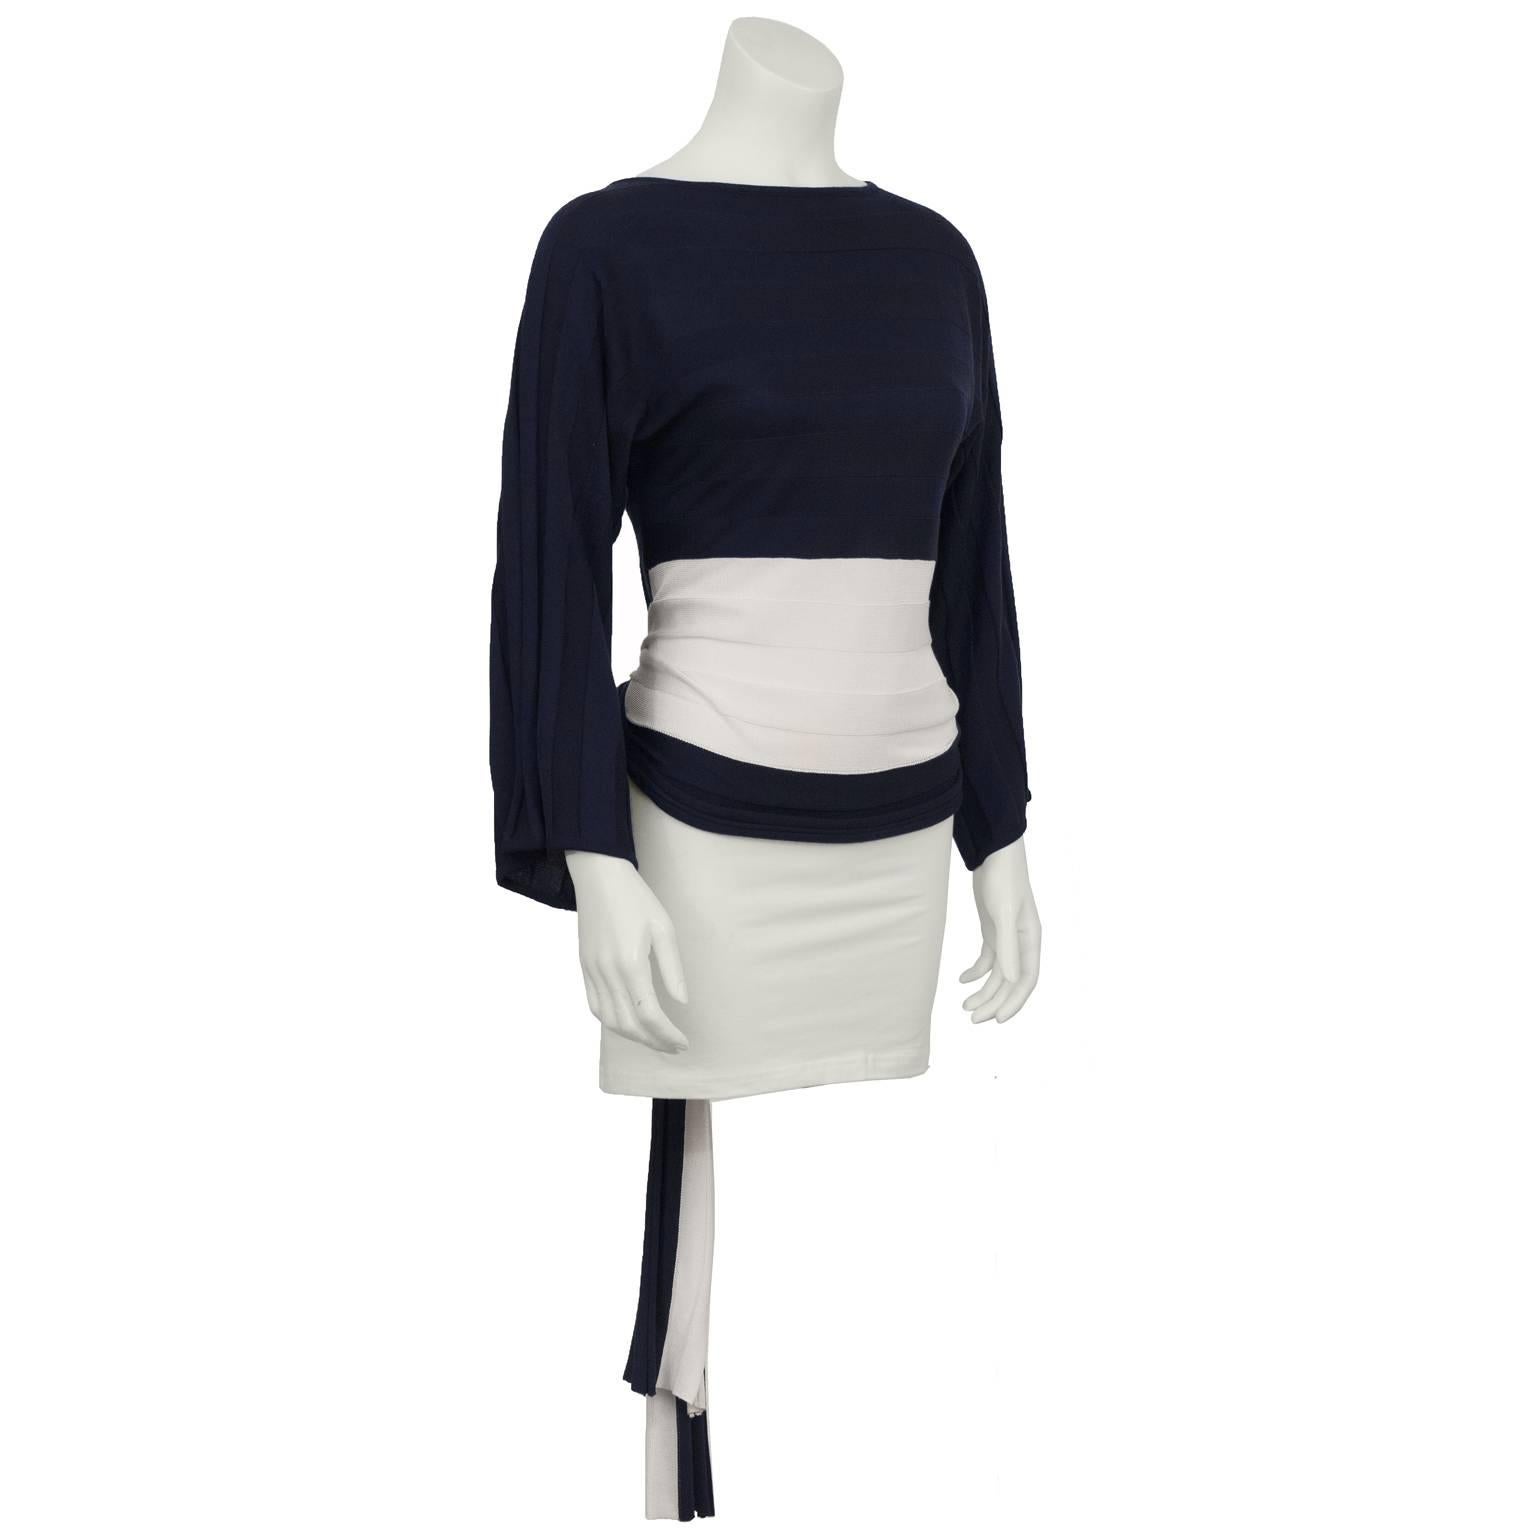 1980's ODLR navy and white sweater with horizontal ribbing, loose fitting sleeves and a tieback detail on the bottom. Excellent condition. Paired with jeans or a narrow skirt this sweater looks super modern. Fits like a US 4-6. 
